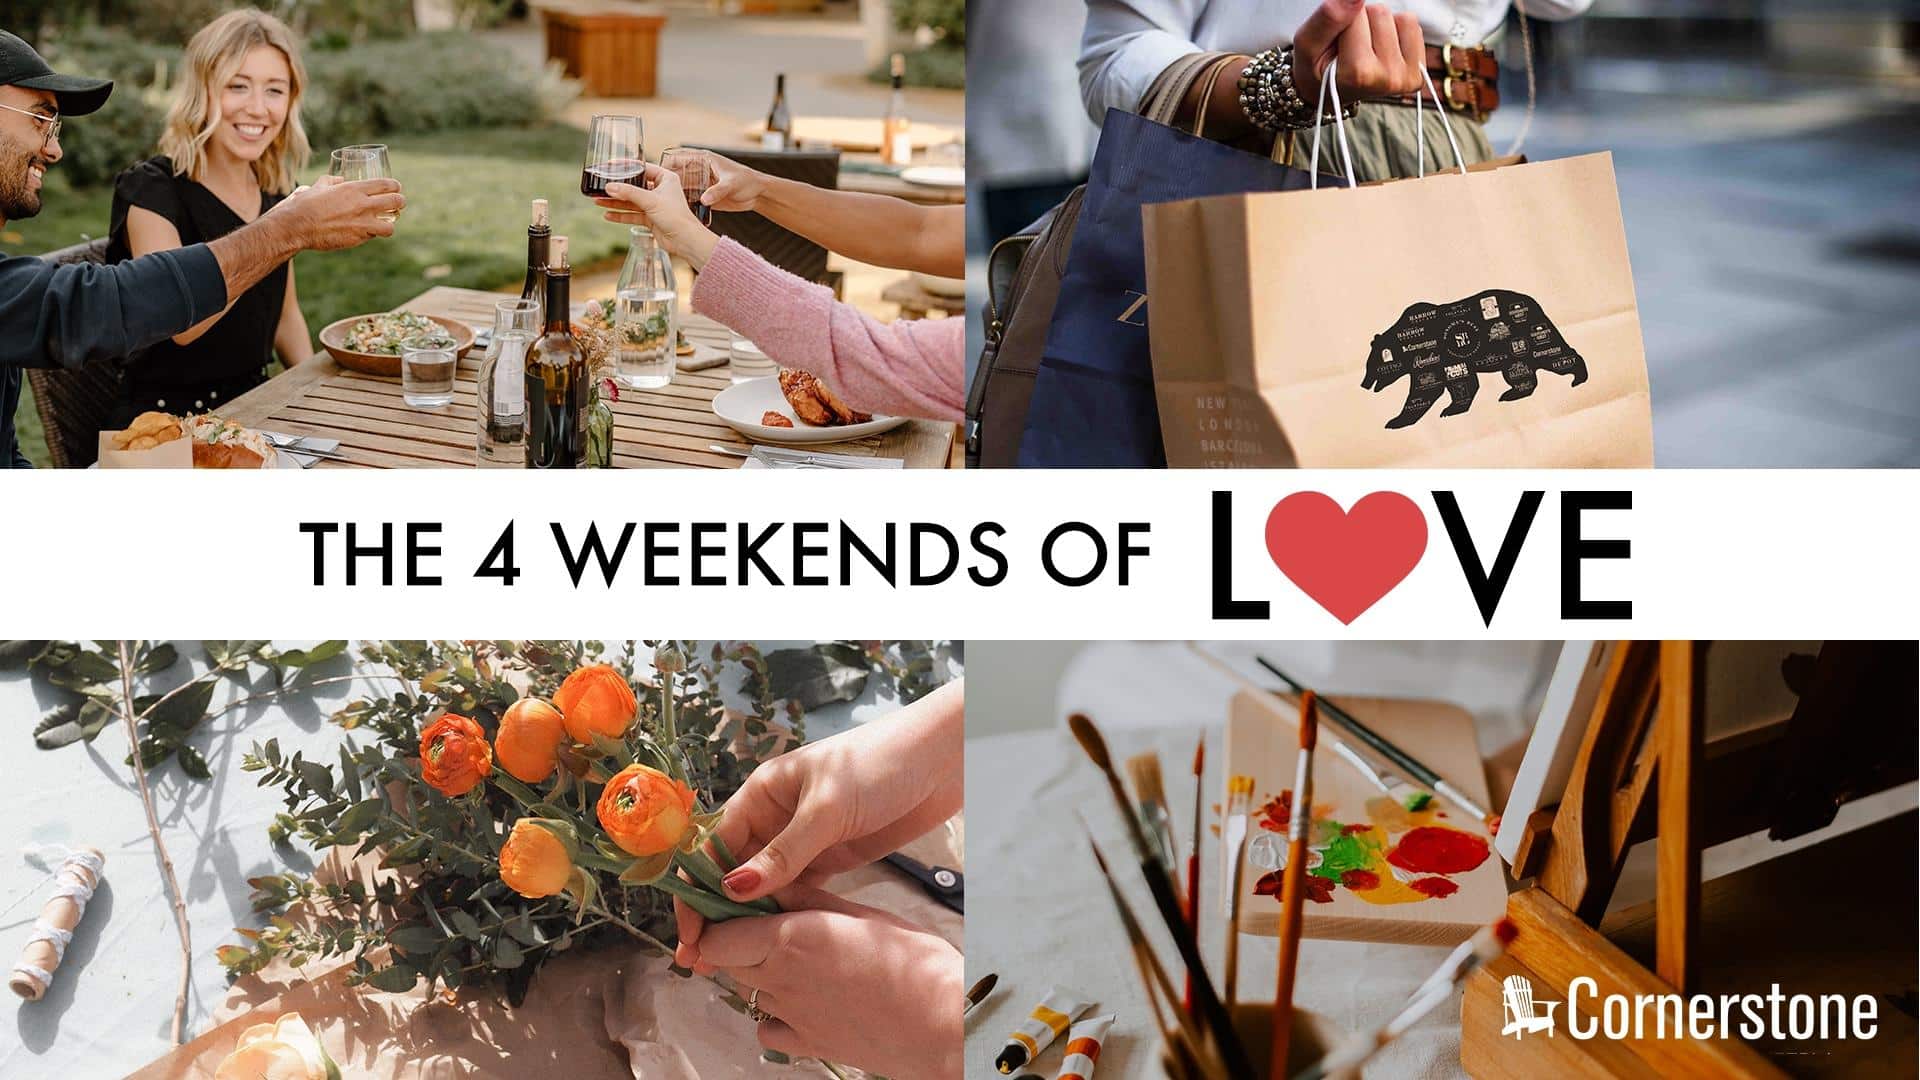 THE 4 WEEKENDS OF LOVE – For the Love of Flowers